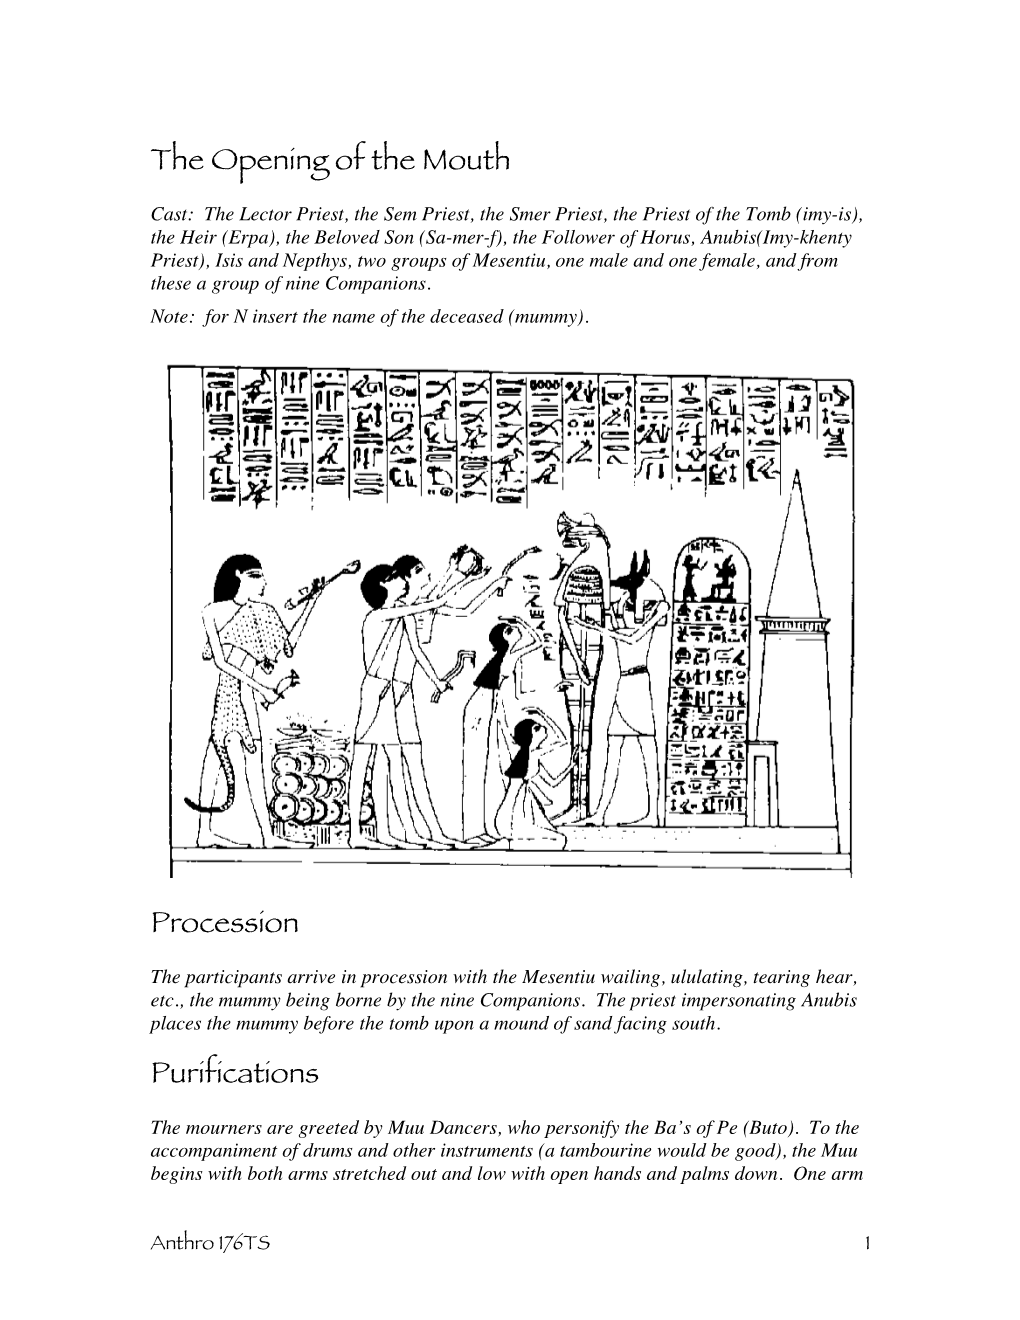 The Opening of the Mouth Procession Purifications